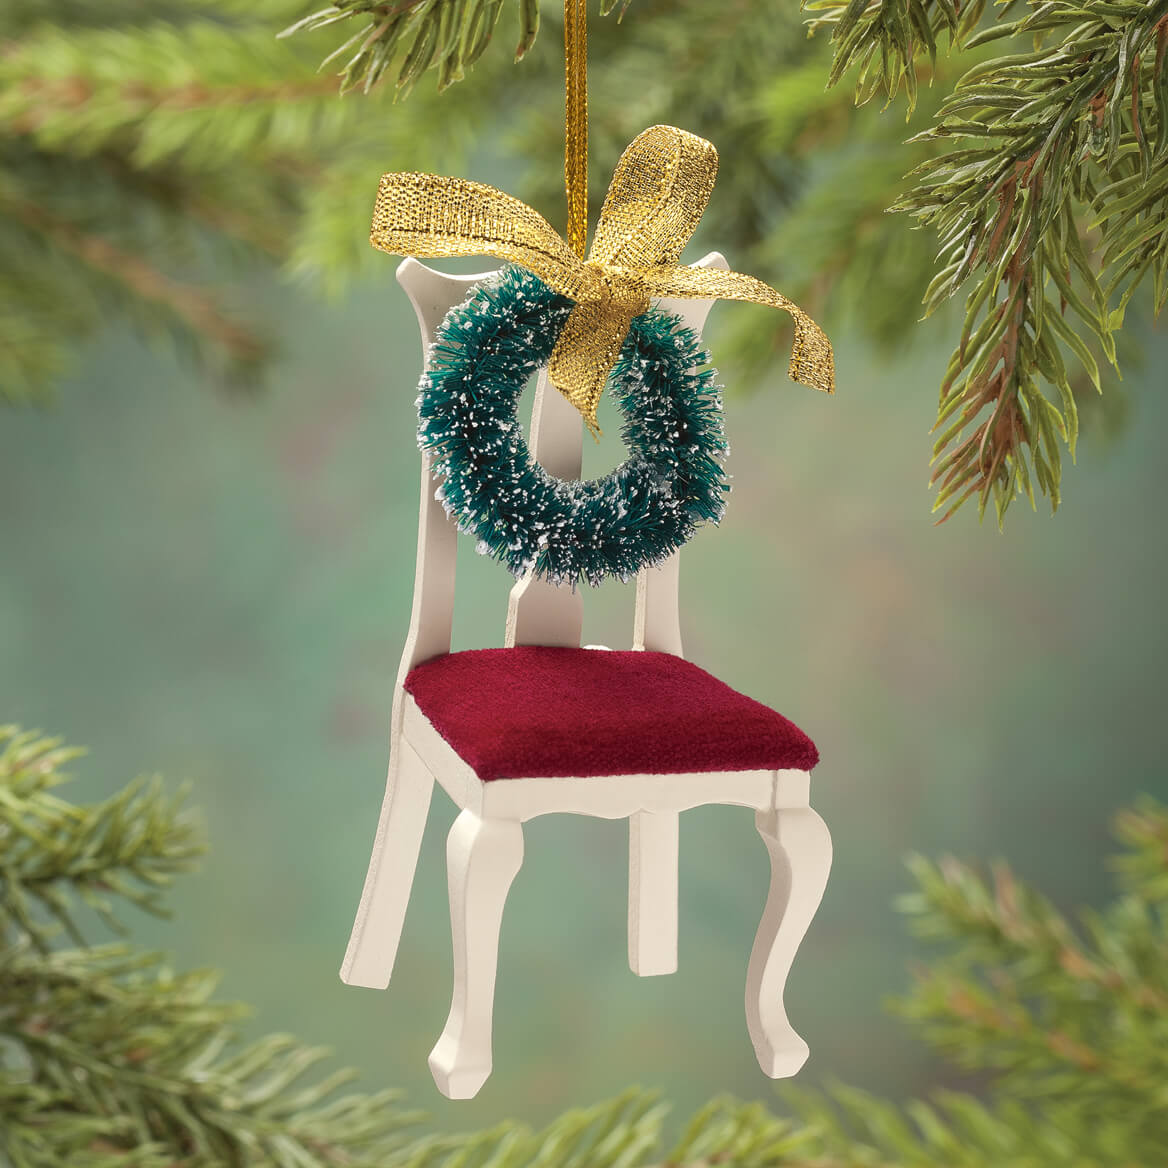 #EmptyChair As we gather around the table with loved ones for the holidays, please remember that not all are there with family. #MissingPerson Remembering all of them this season. @jake_missing @Justice4Tanner @JusticeForDj88 @MacinsArmy @SarahETurney